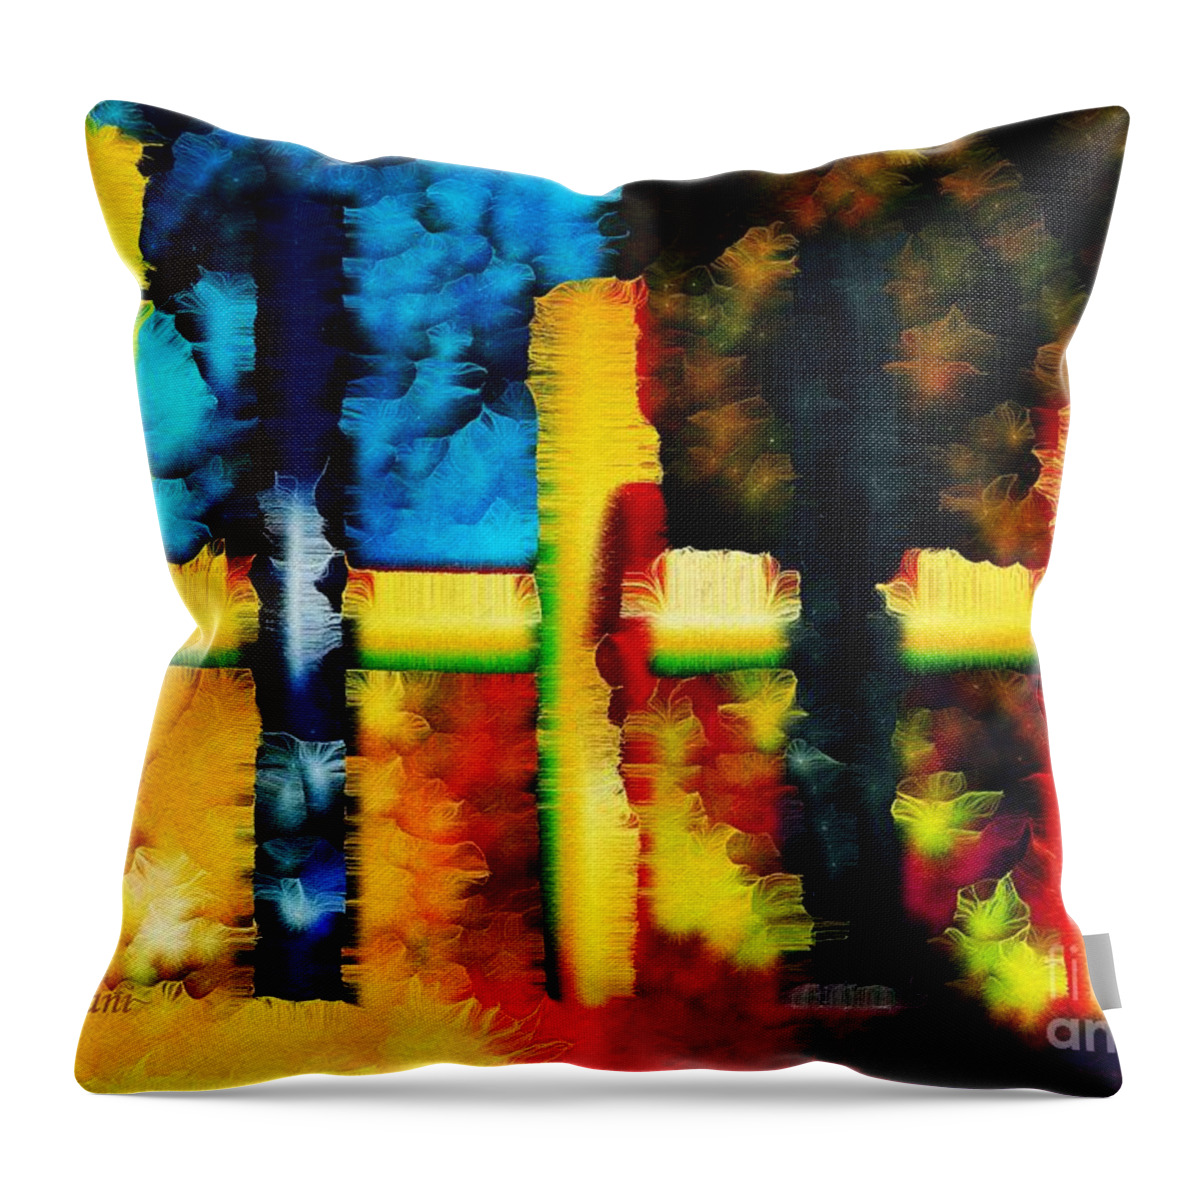 Global Warming Throw Pillow featuring the mixed media Ode to Australia California Antarctica and the Amazon Rainforest by Aberjhani